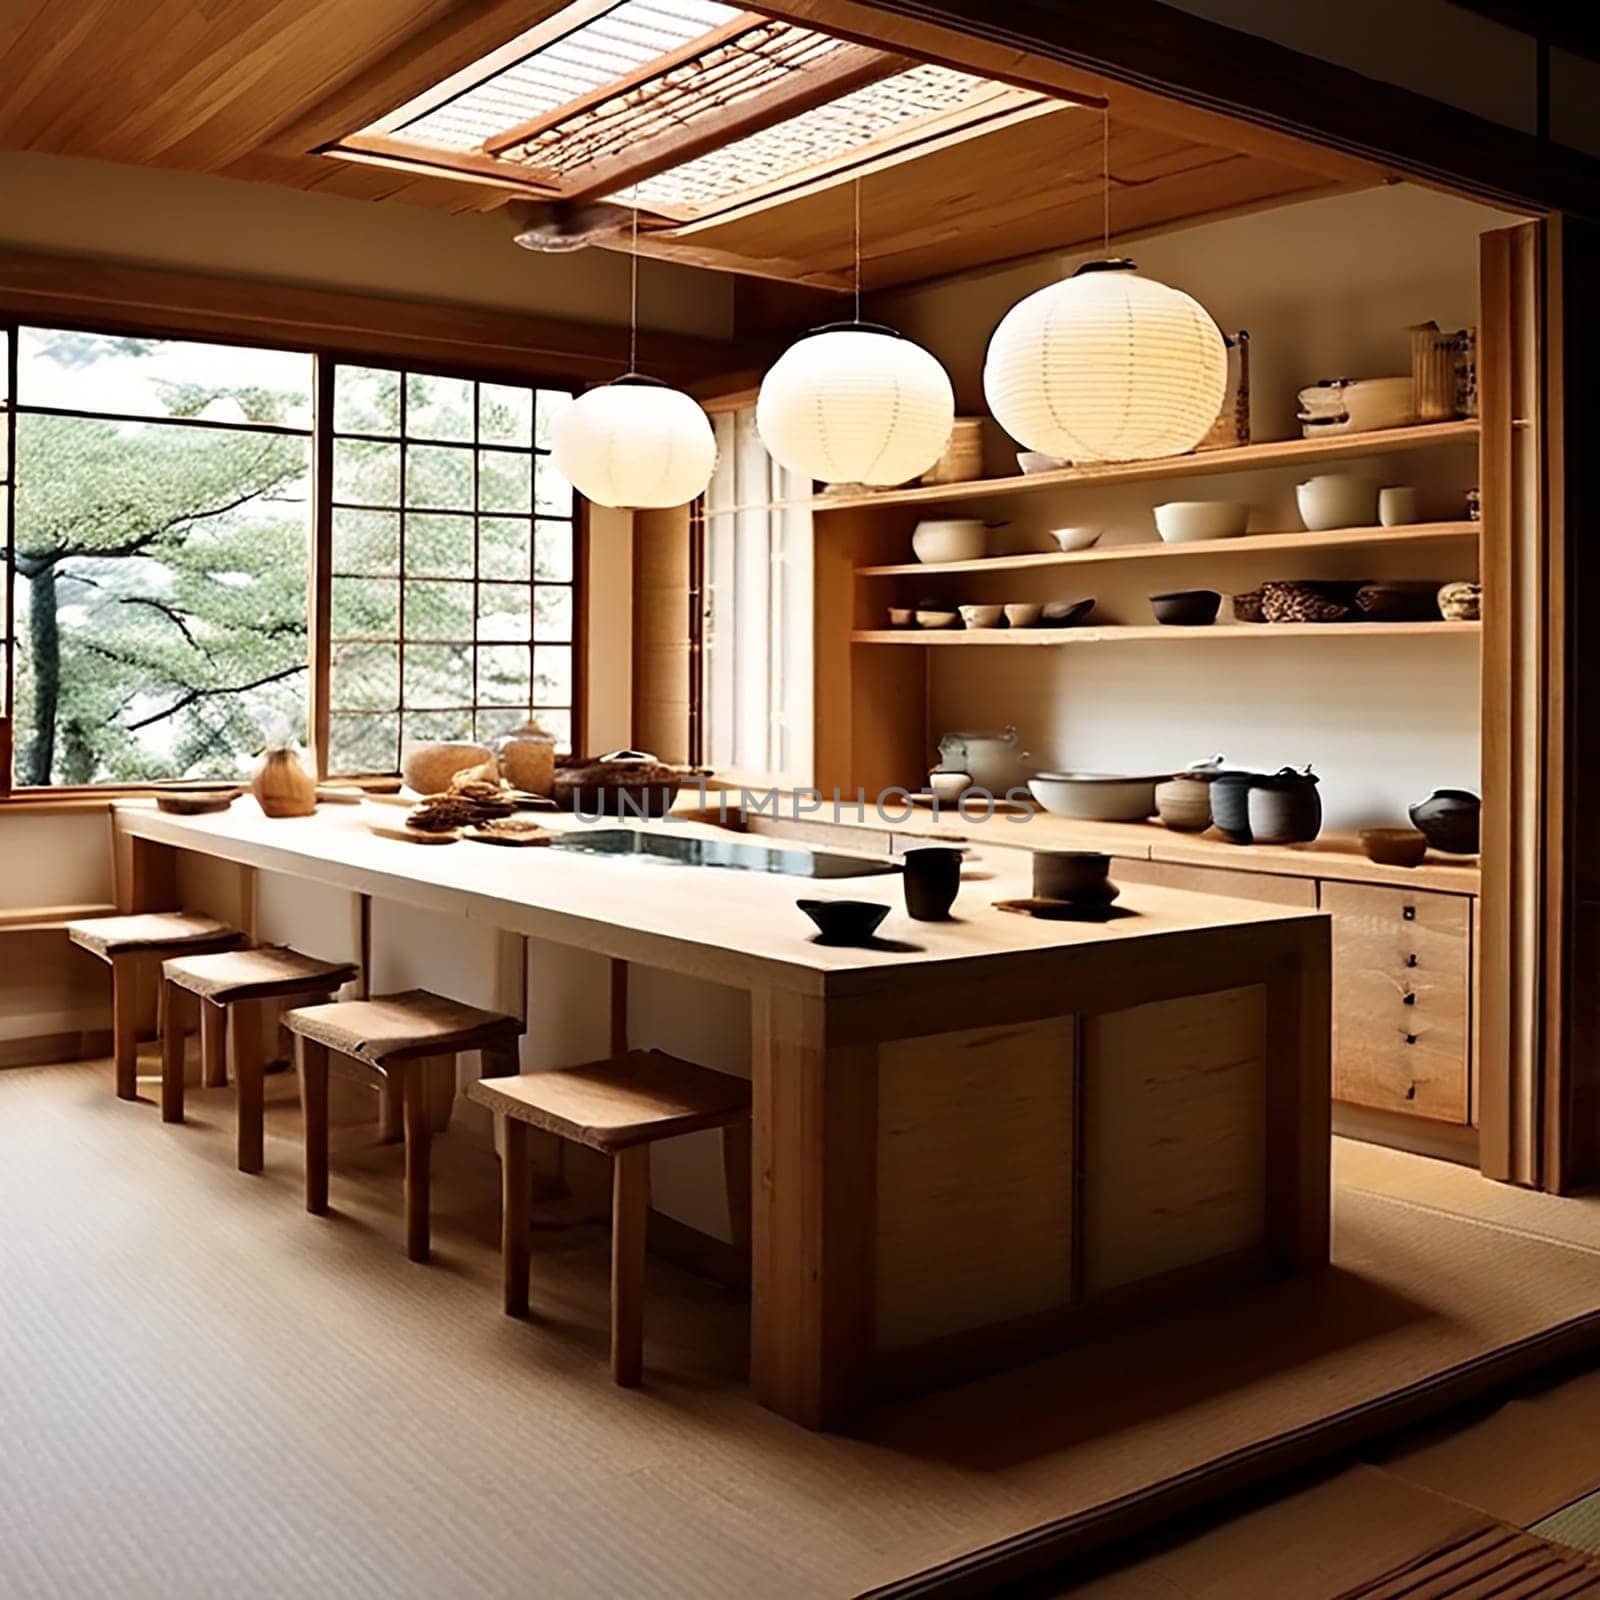 Kitchen Harmony: Balancing Form and Function in Your Culinary Sanctuary by Petrichor